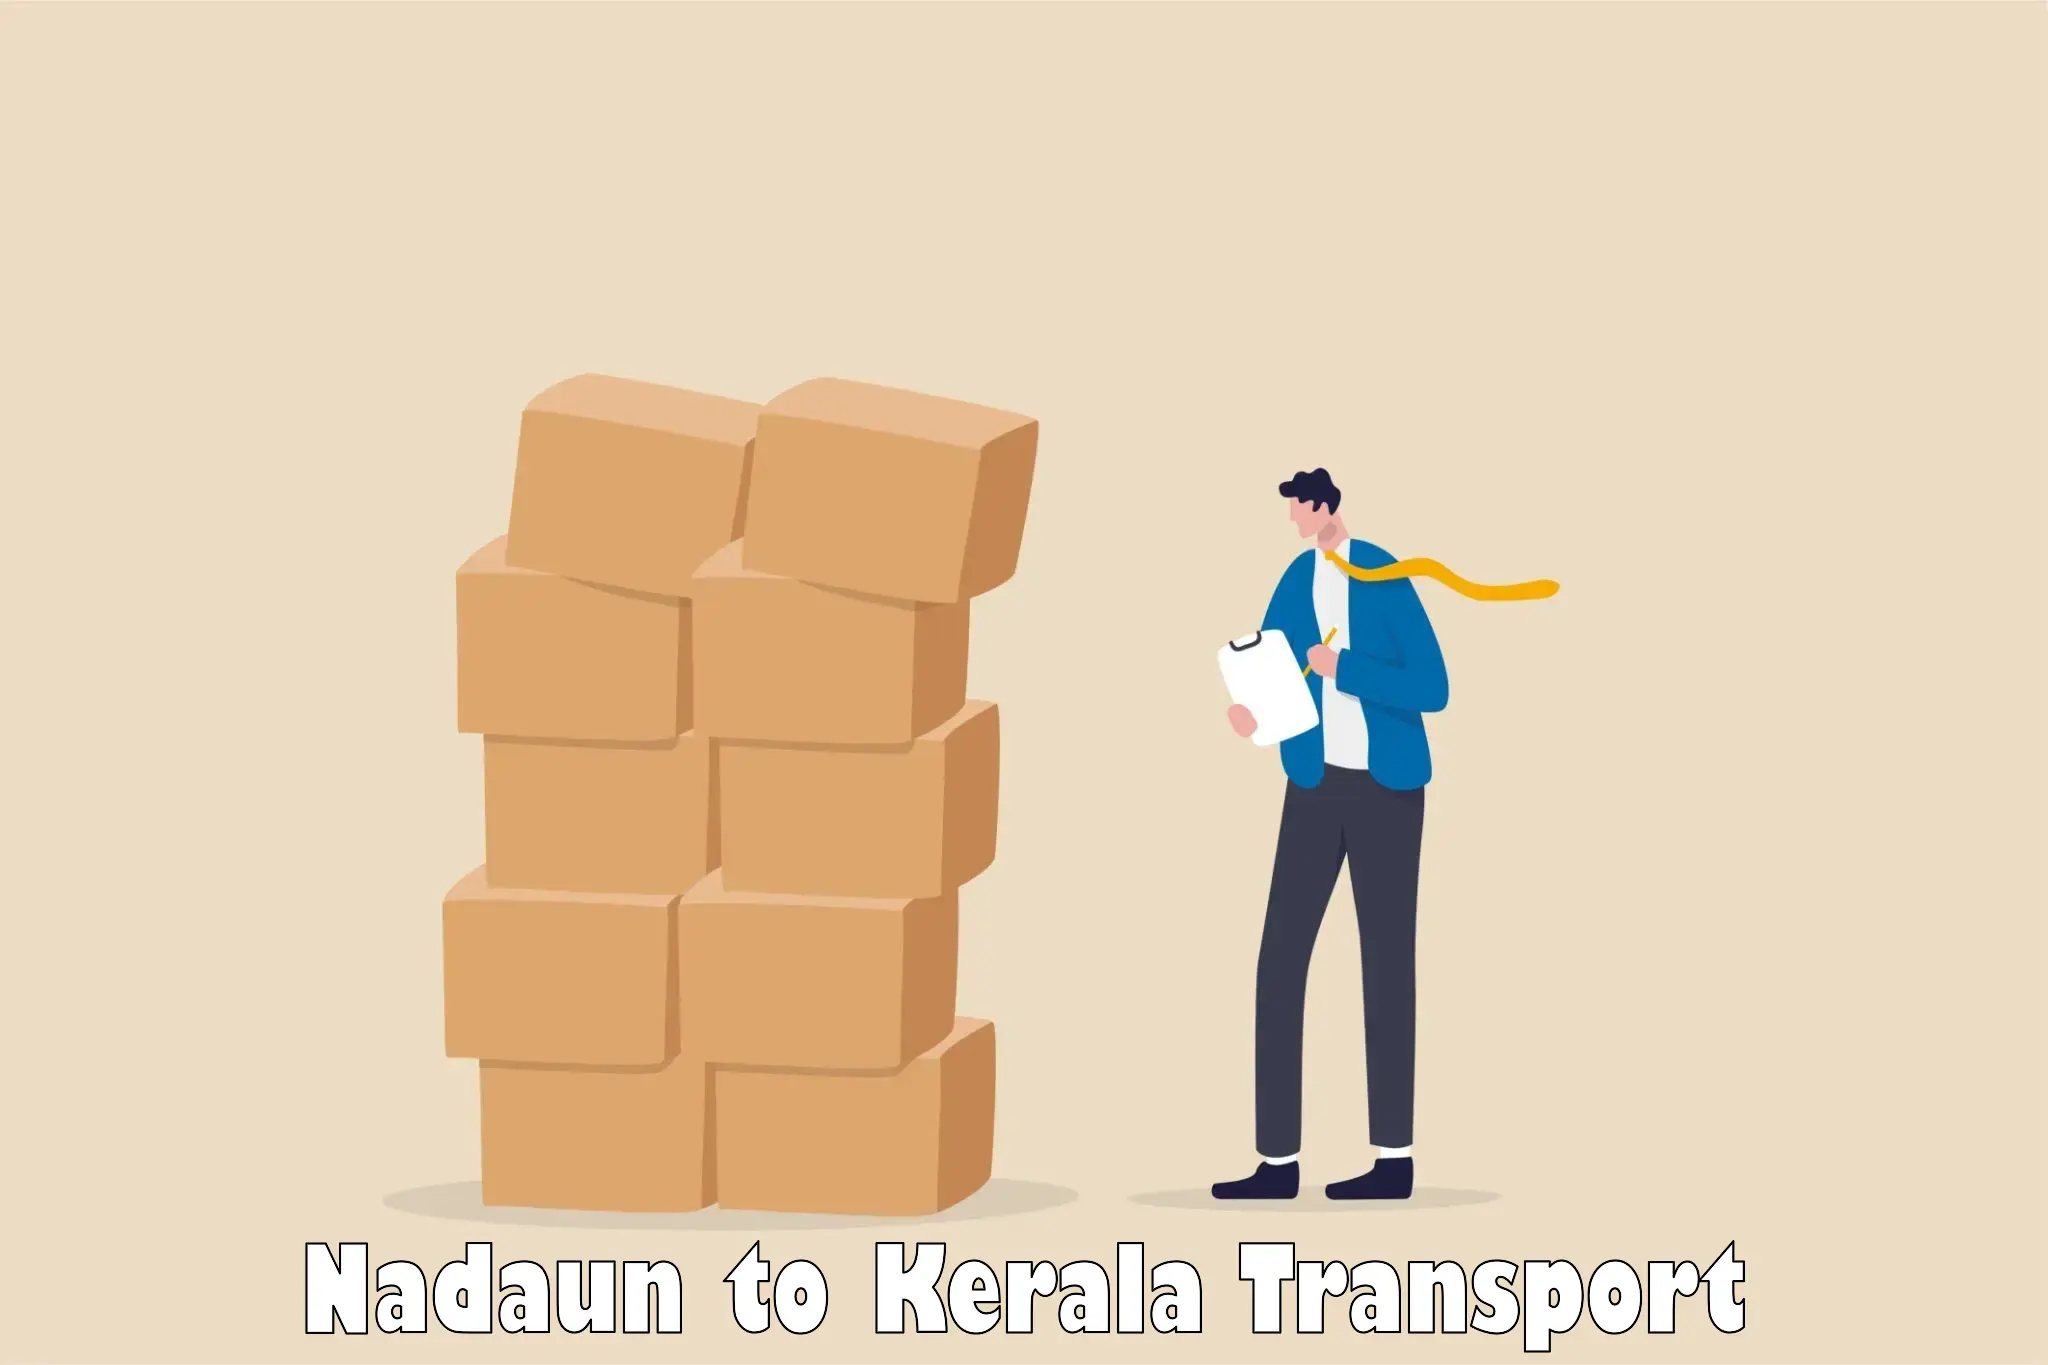 Transport bike from one state to another Nadaun to Kerala